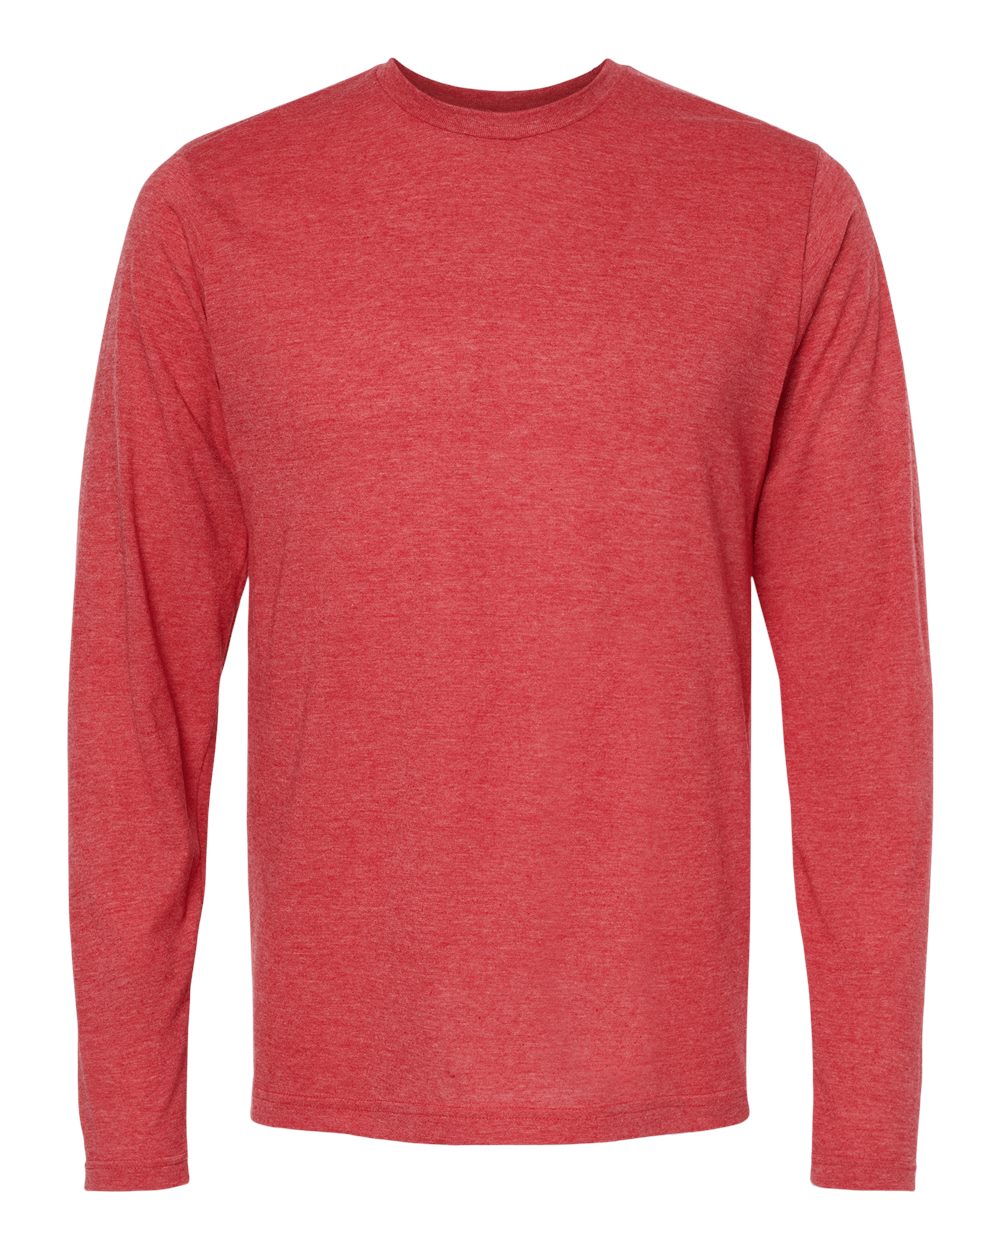 M&O Poly-Blend Long Sleeve T-Shirt 3520 #color_Heather Red